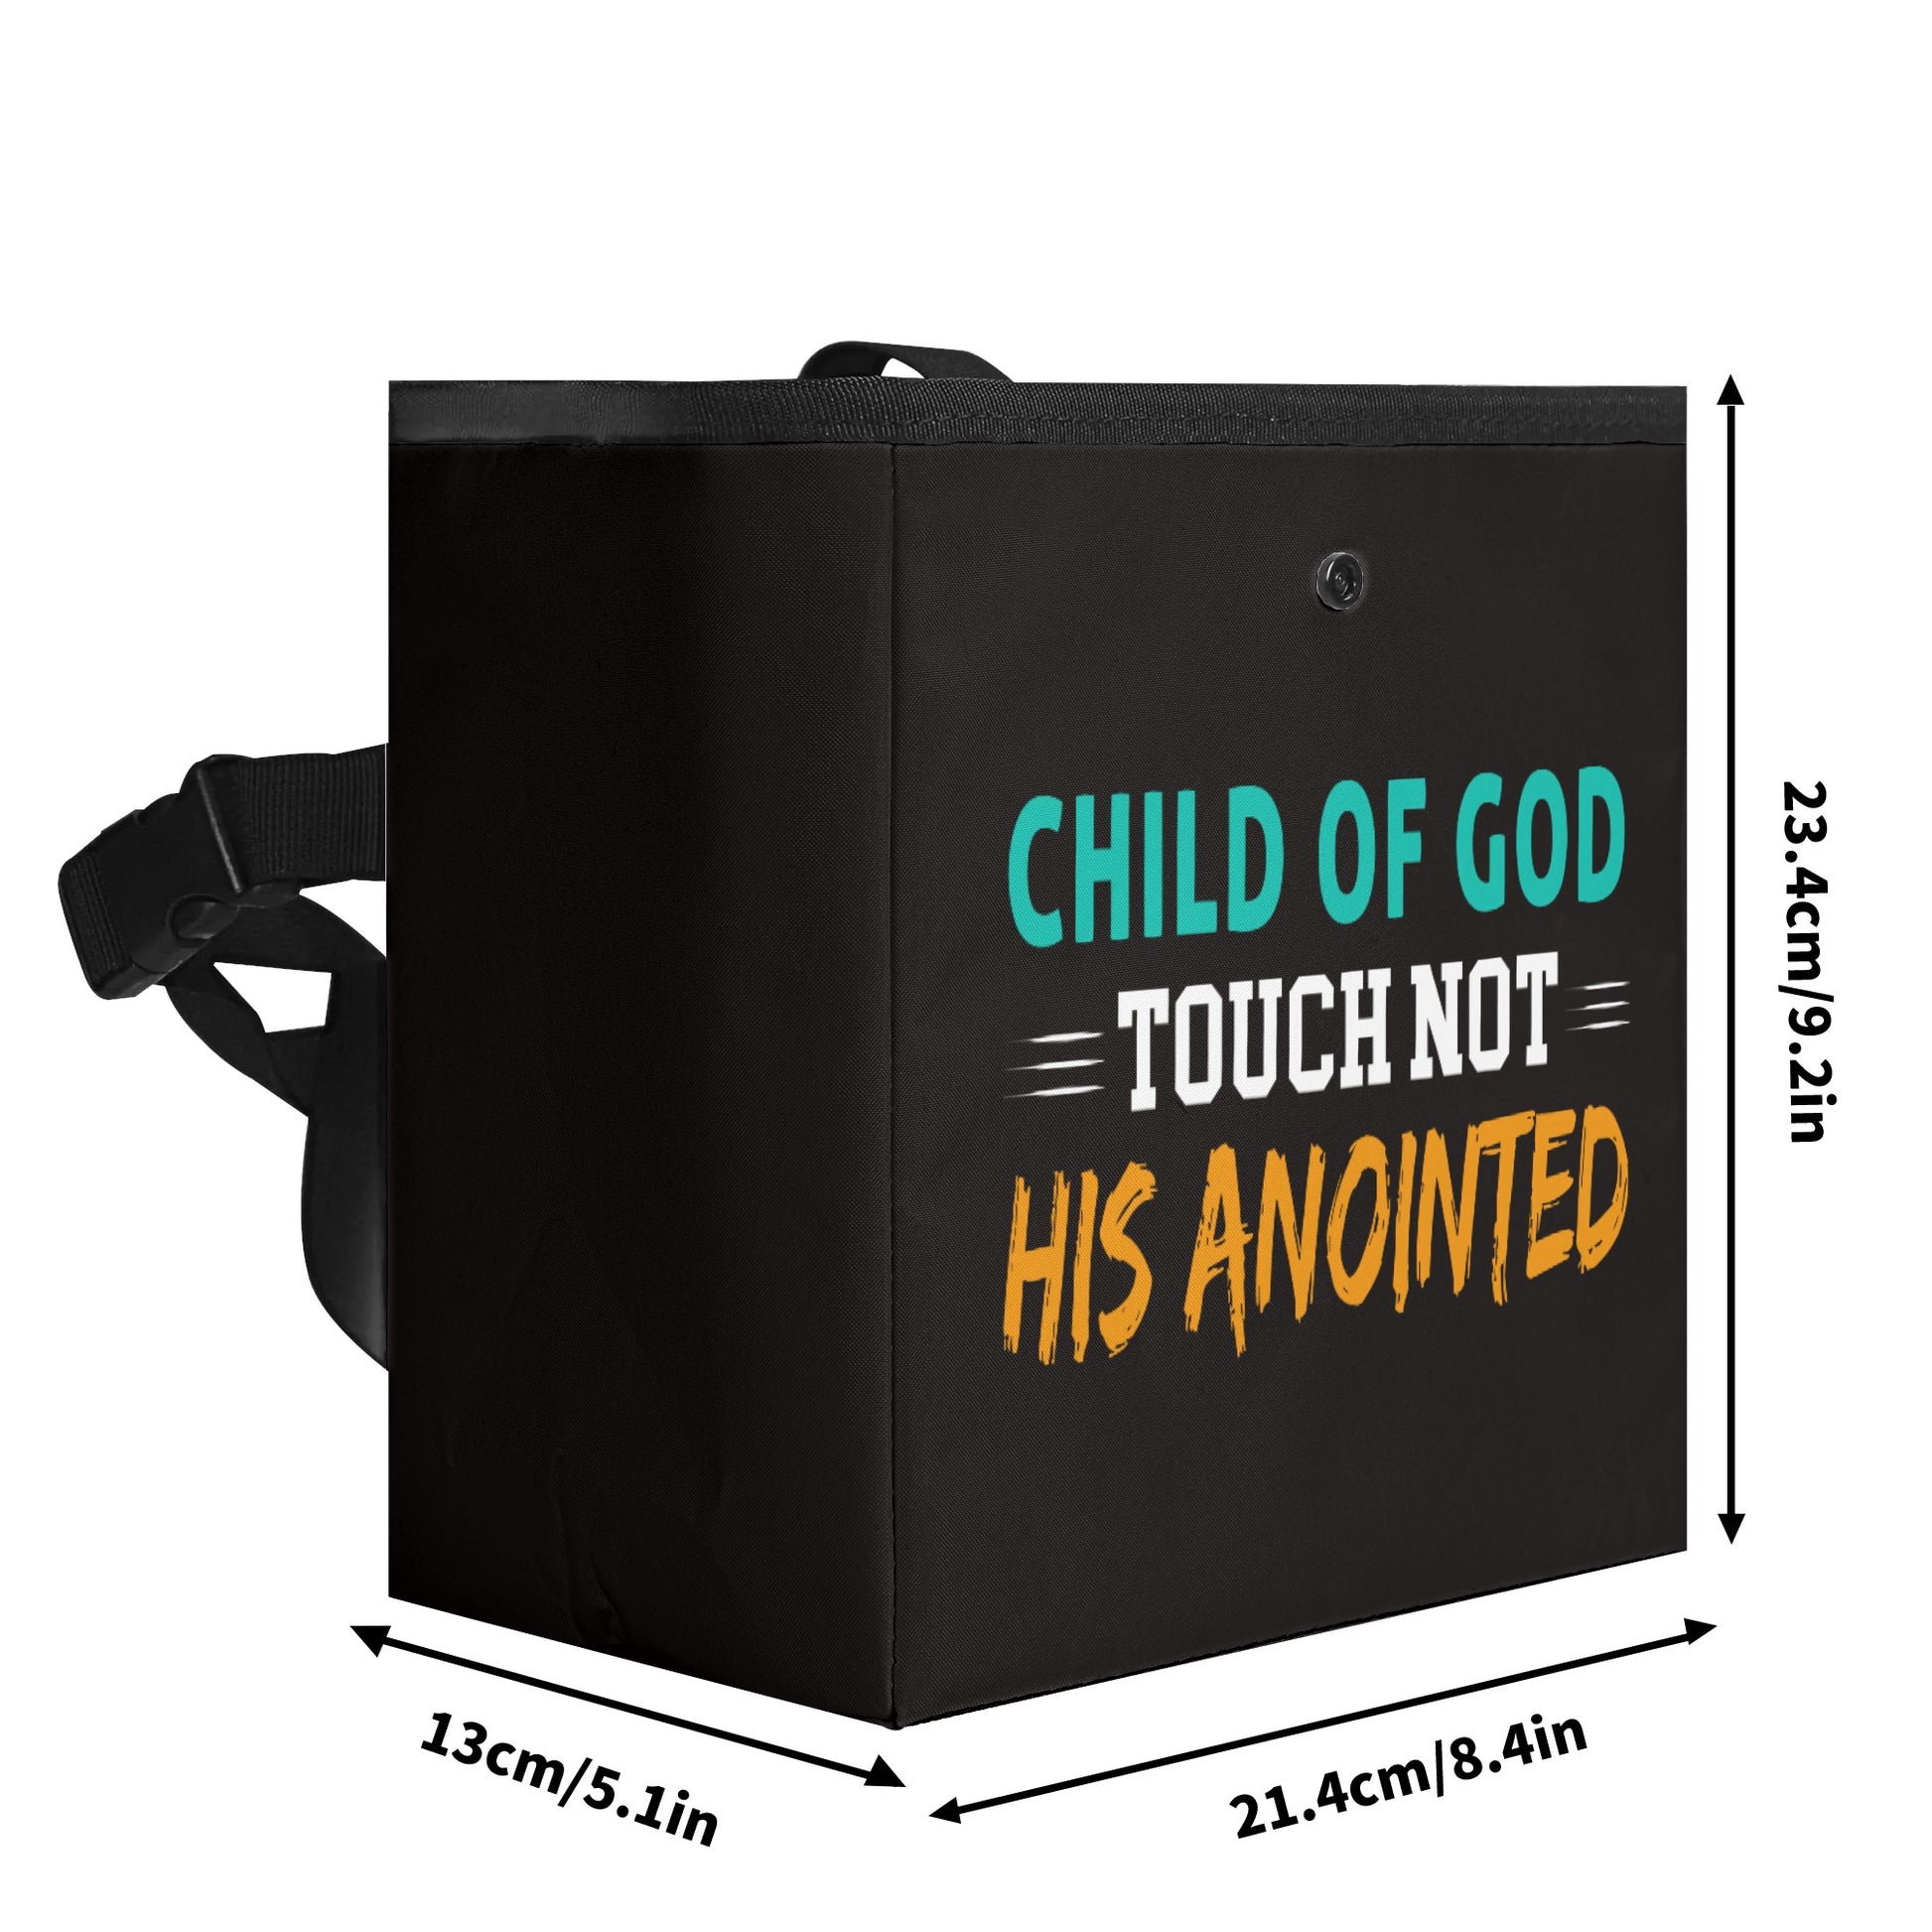 Child Of God Touch Not His Anointed Hanging Storage Trash Car Organizer Bag Christian Car Accessories popcustoms